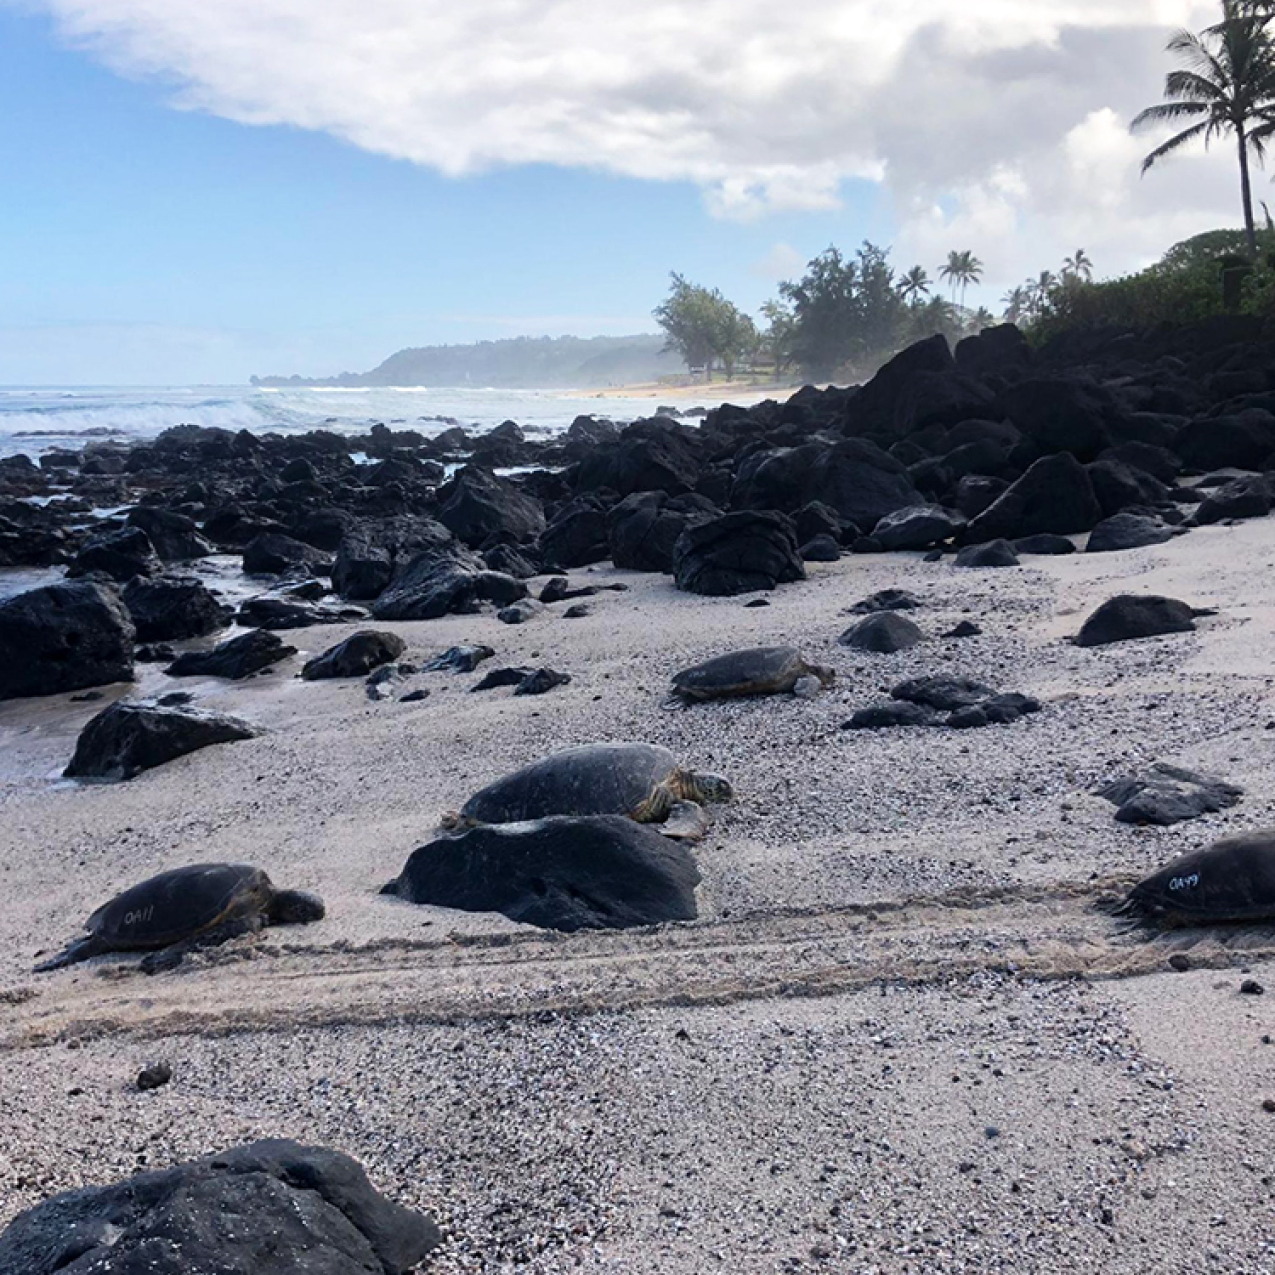 Green sea turtles rest on a Hawaiian beach. The turtles have white number markings on their carapaces.